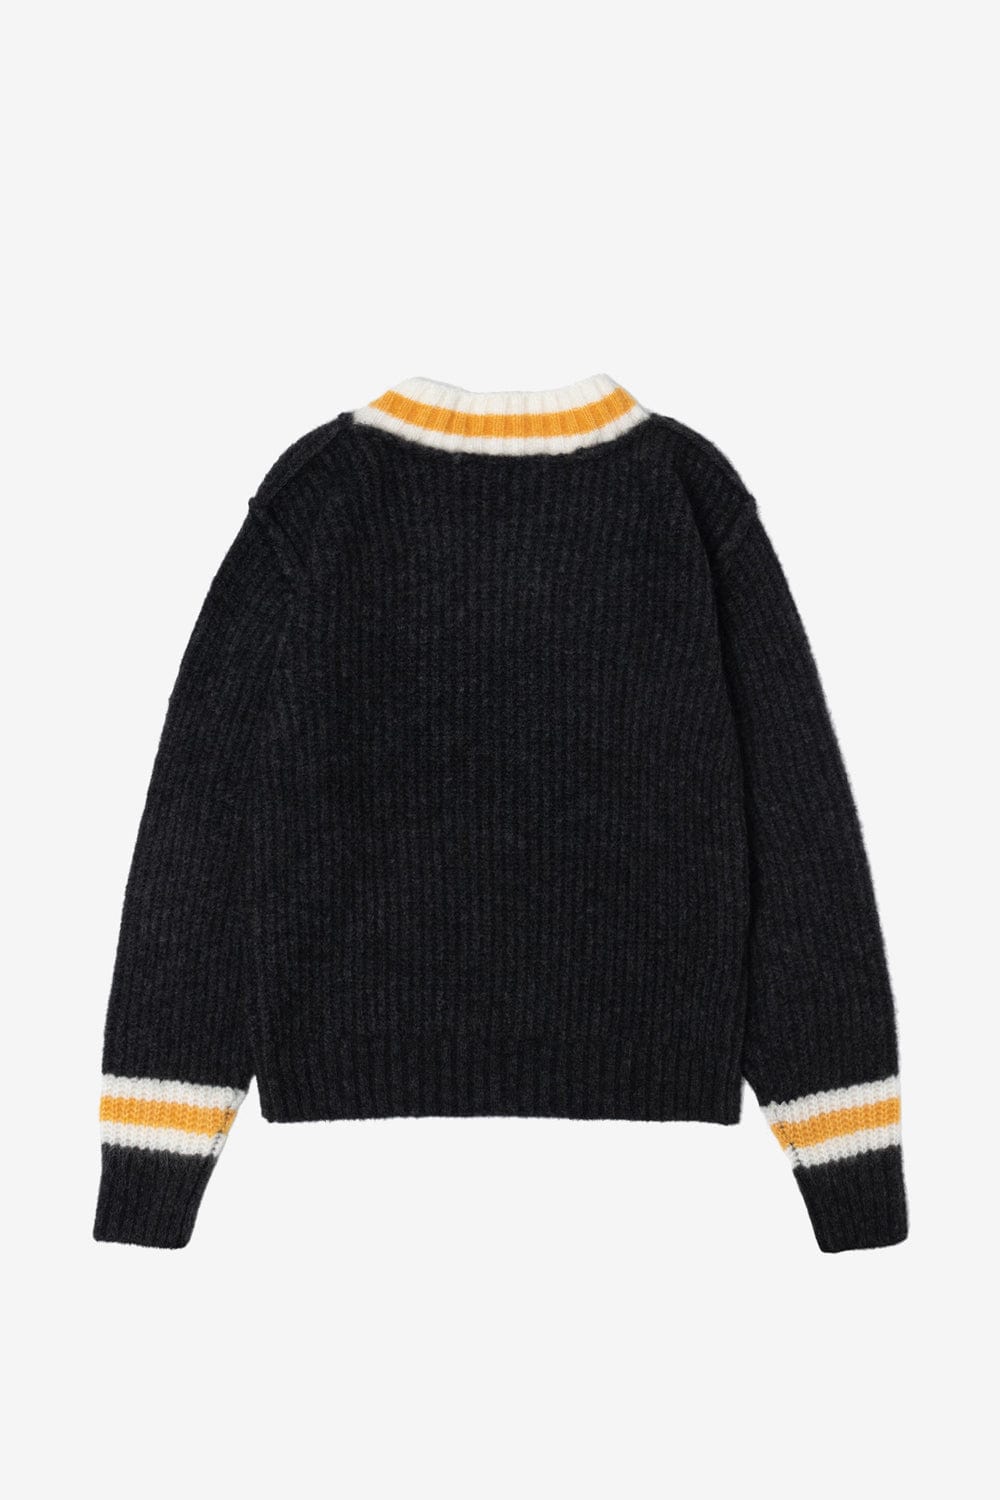 Stussy Mohair Tennis Sweater (Charcoal) - Commonwealth